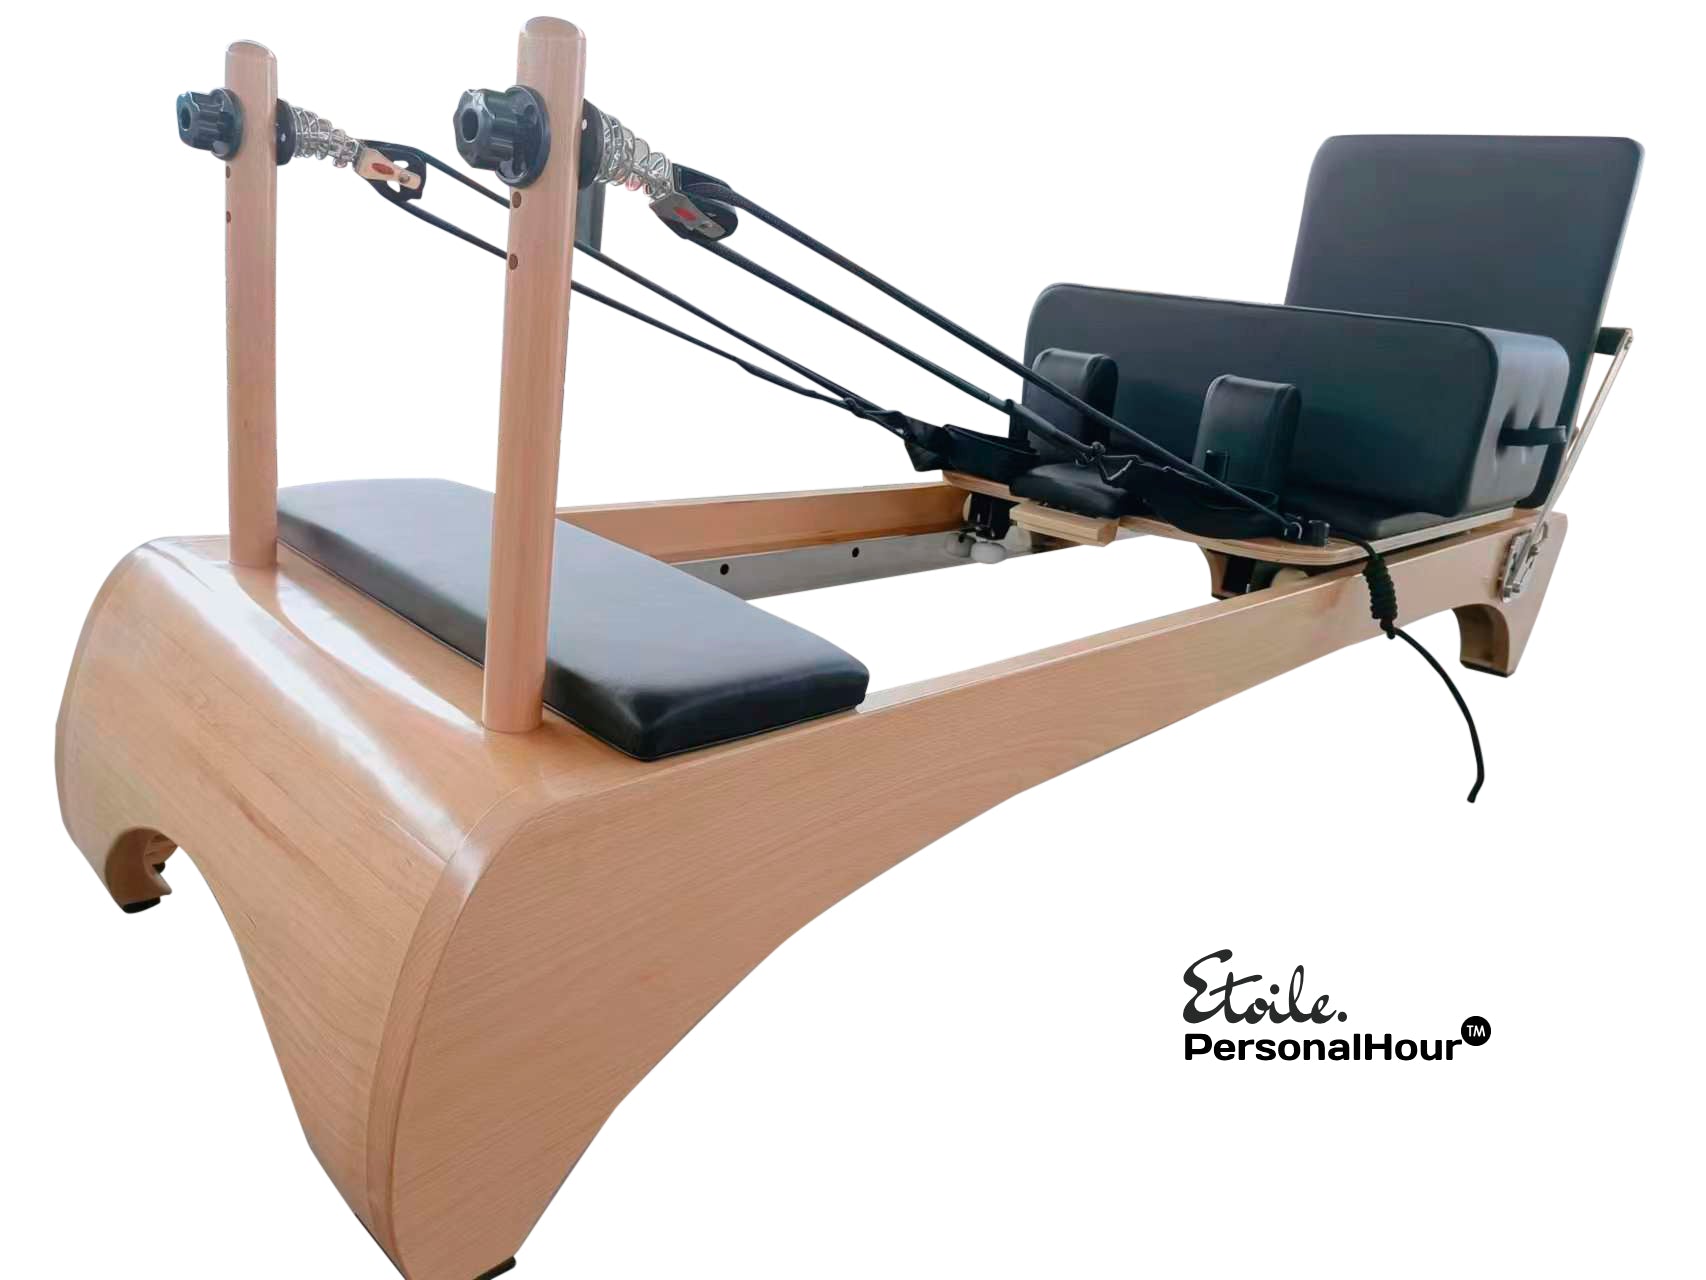 Curved Design Studio Pilates Reformer Bed - Etoile - Personal Hour for Yoga and Meditations 